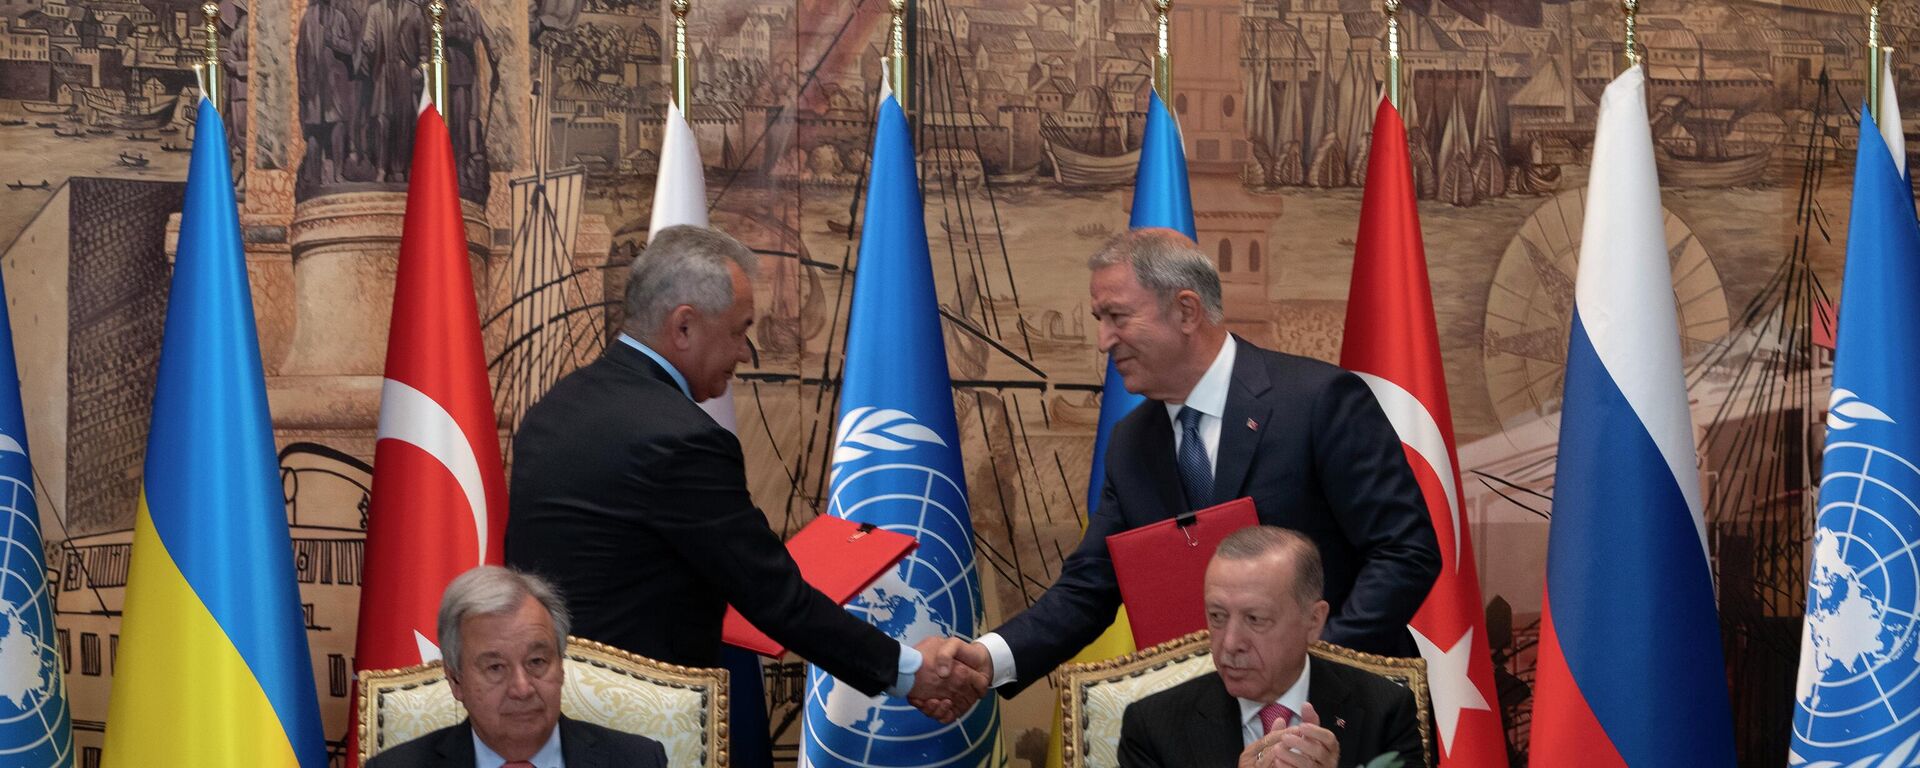 Turkish President Recep Tayyip Erdogan, right, and U.N. Secretary General, Antonio Guterres, sit as two representatives of Ukraine and Russia delegations check hands during a signing ceremony at Dolmabahce Palace in Istanbul, Turkey, Friday, July 22, 2022 - Sputnik International, 1920, 23.07.2022